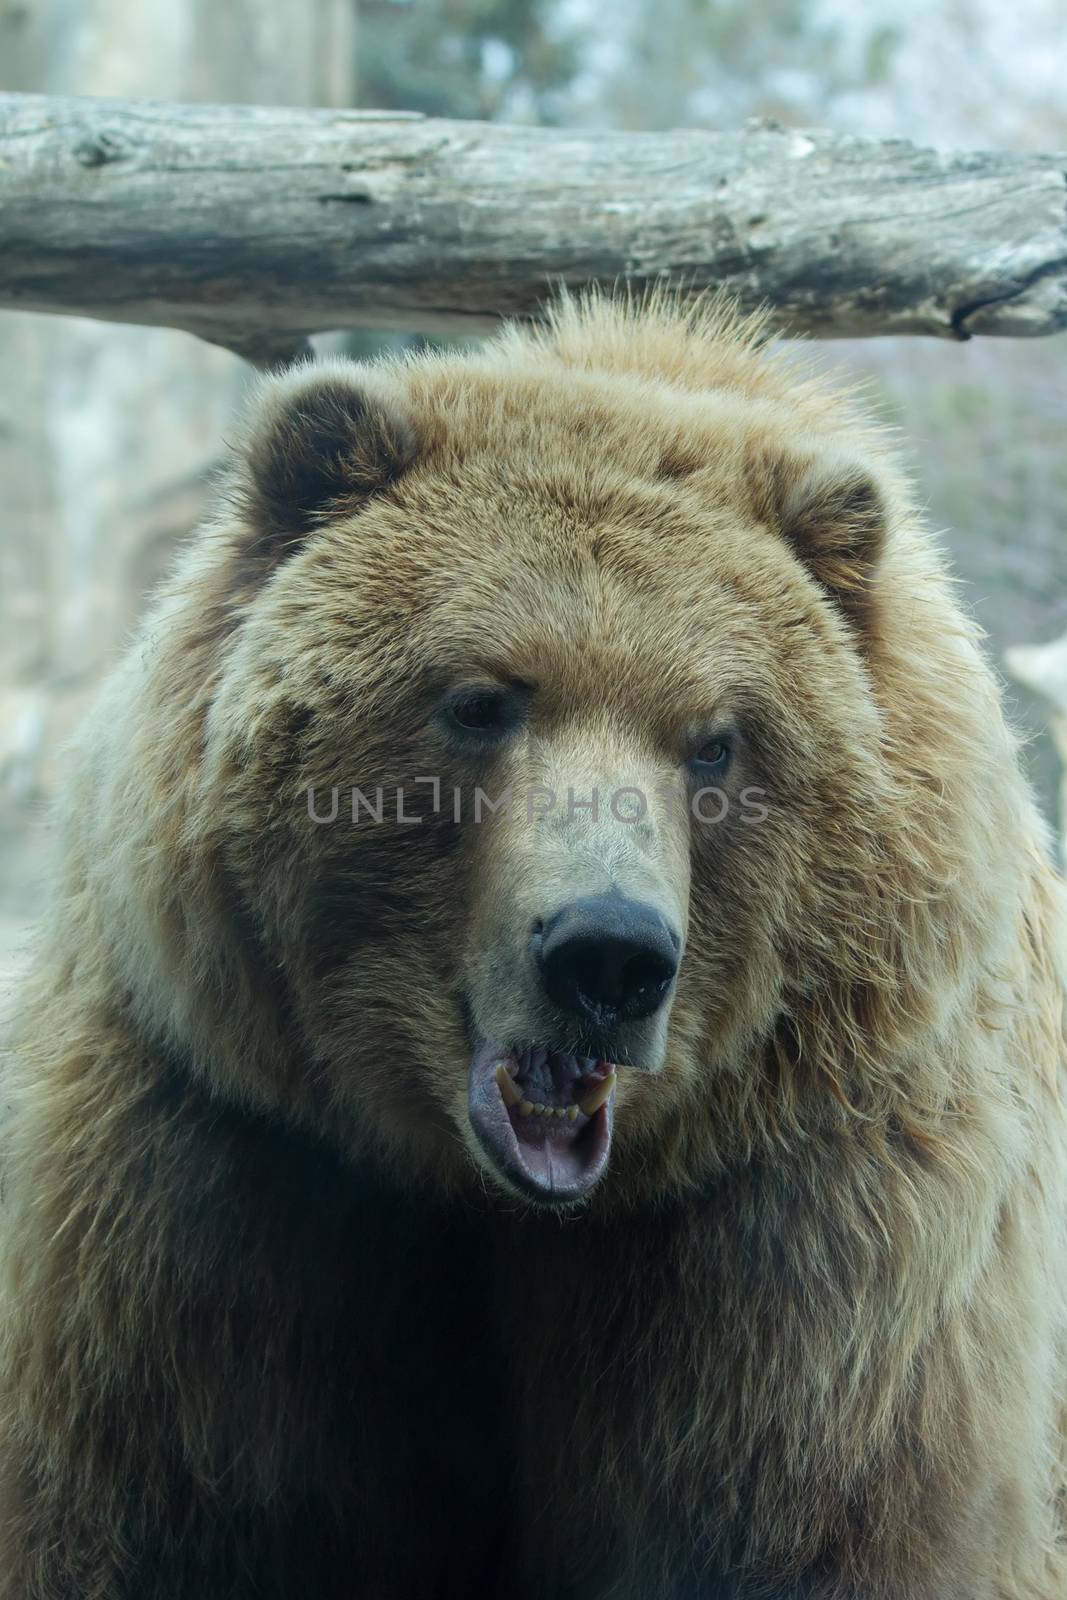 Brown Bear at the zoo by Coffee999